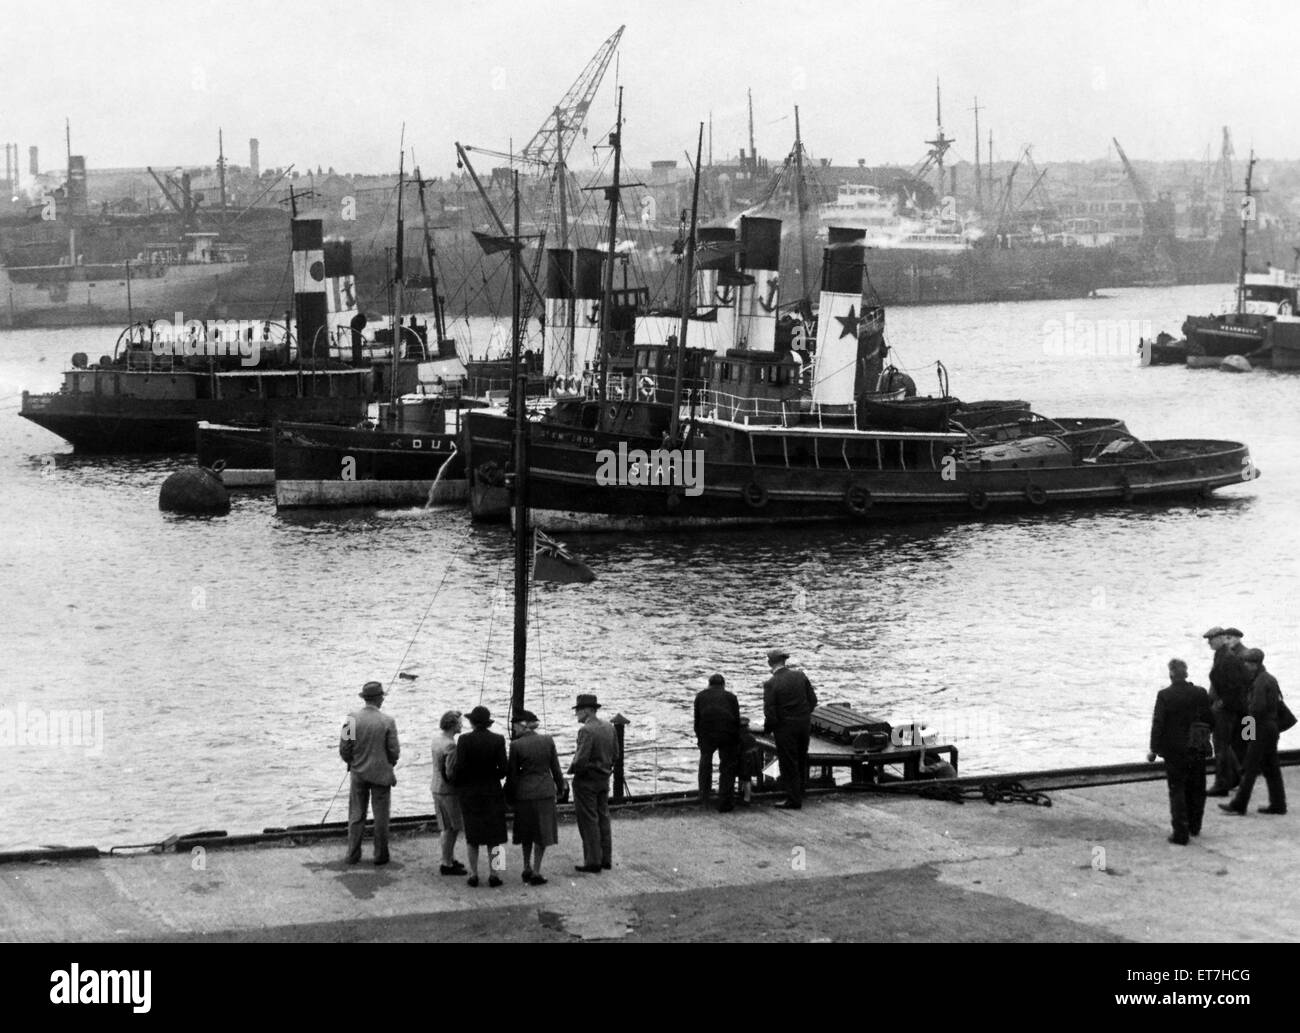 Tugboats of the France, Fenwick company of Tyne and Wear pictured at their moorings off South Shields. Following company tradition, they all fly their flags at half mast in tribute to the late skipper of the Criccieth, Captain John McCarrick. 6th July 194 Stock Photo